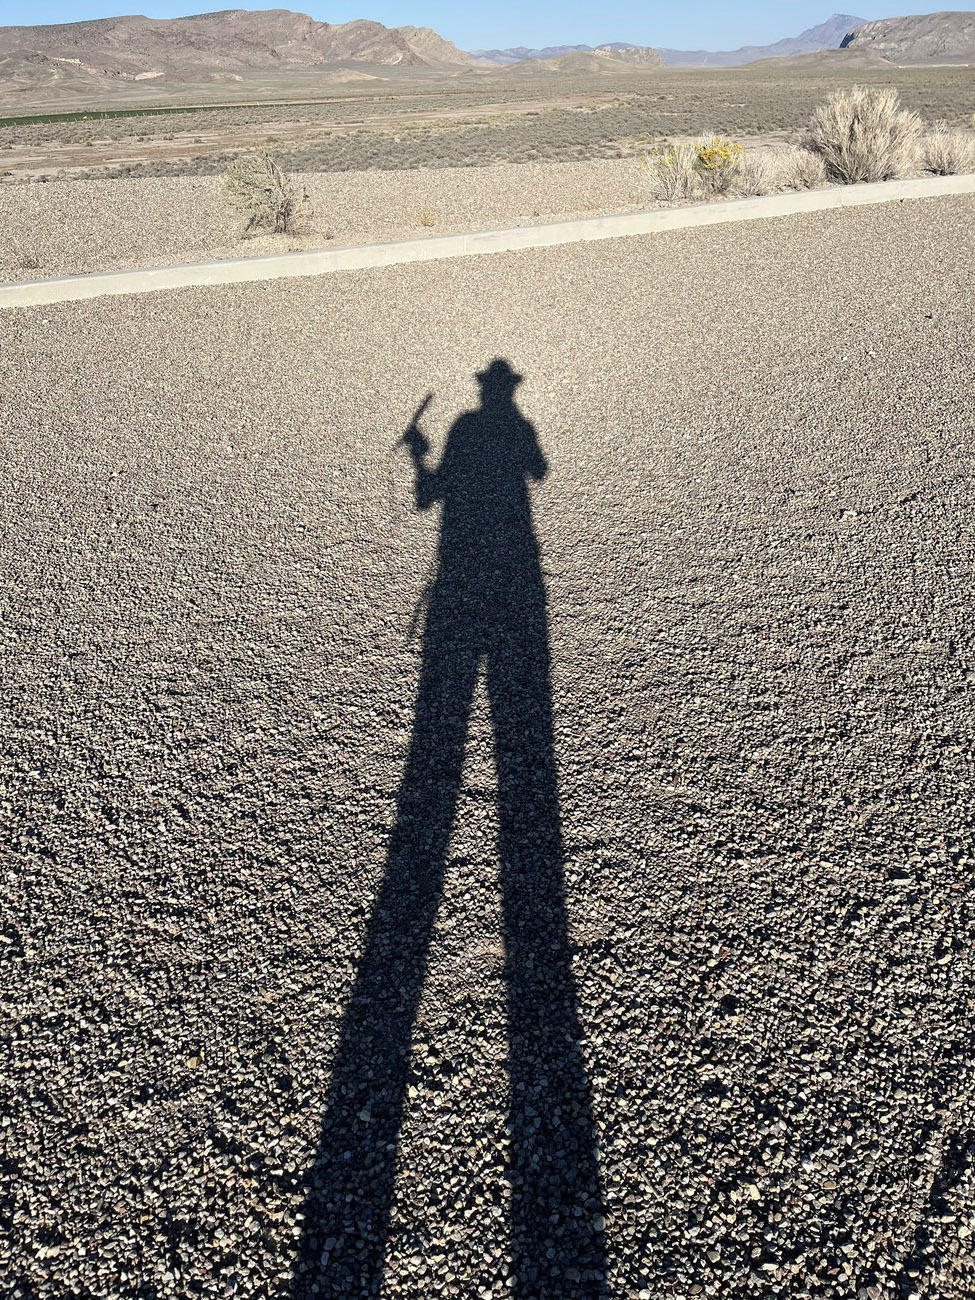 NPR reporter Chloe Veltman takes stock of the length of her shadow while wandering around <em>City</em>.